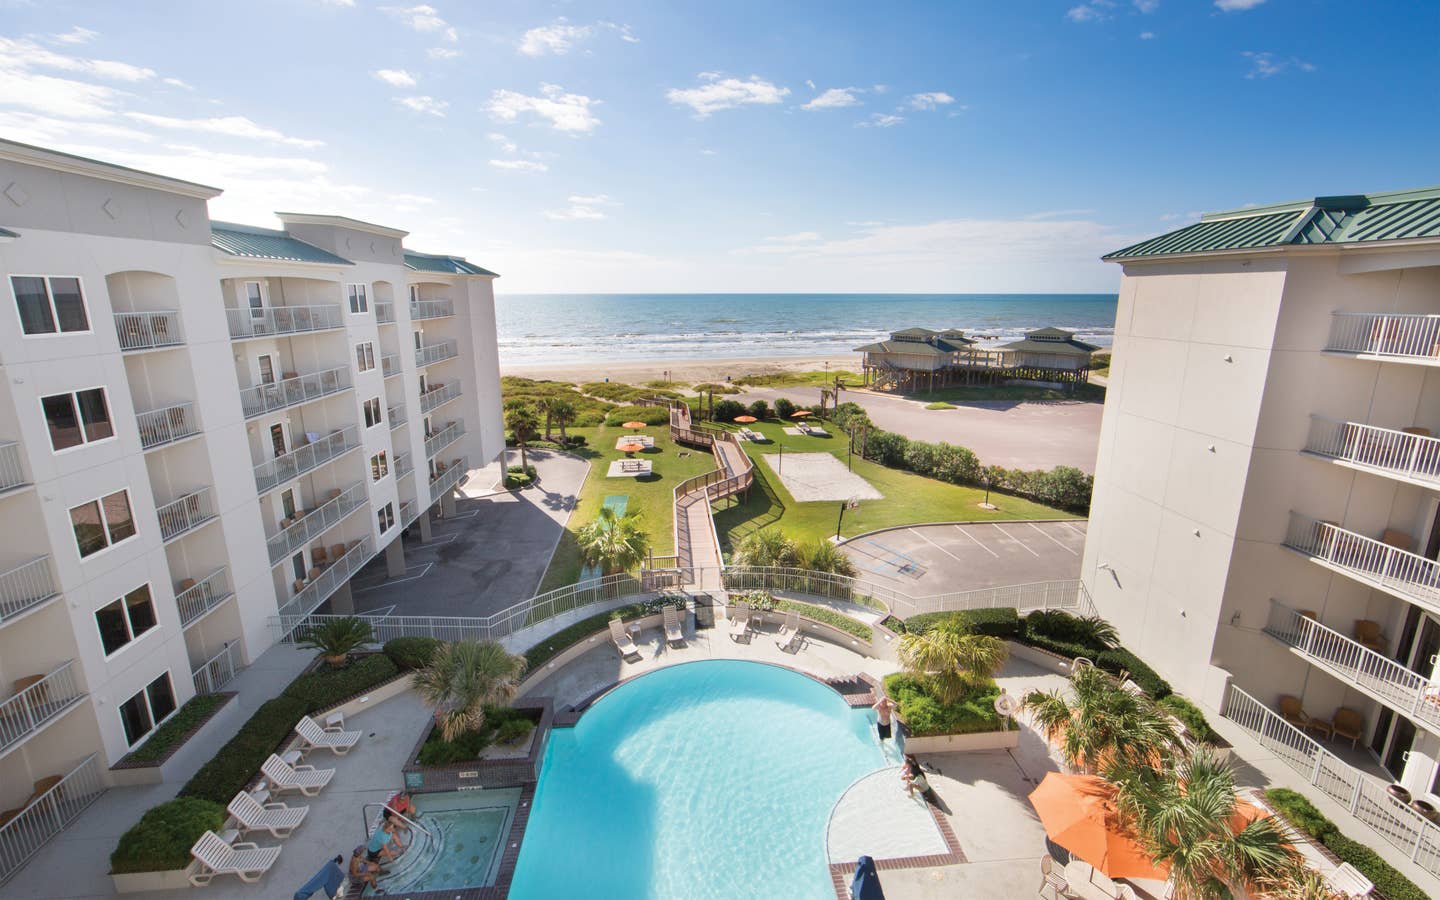 View of outdoor infinity pool and beach from Galveston Beach Resort room balcony in Texas.